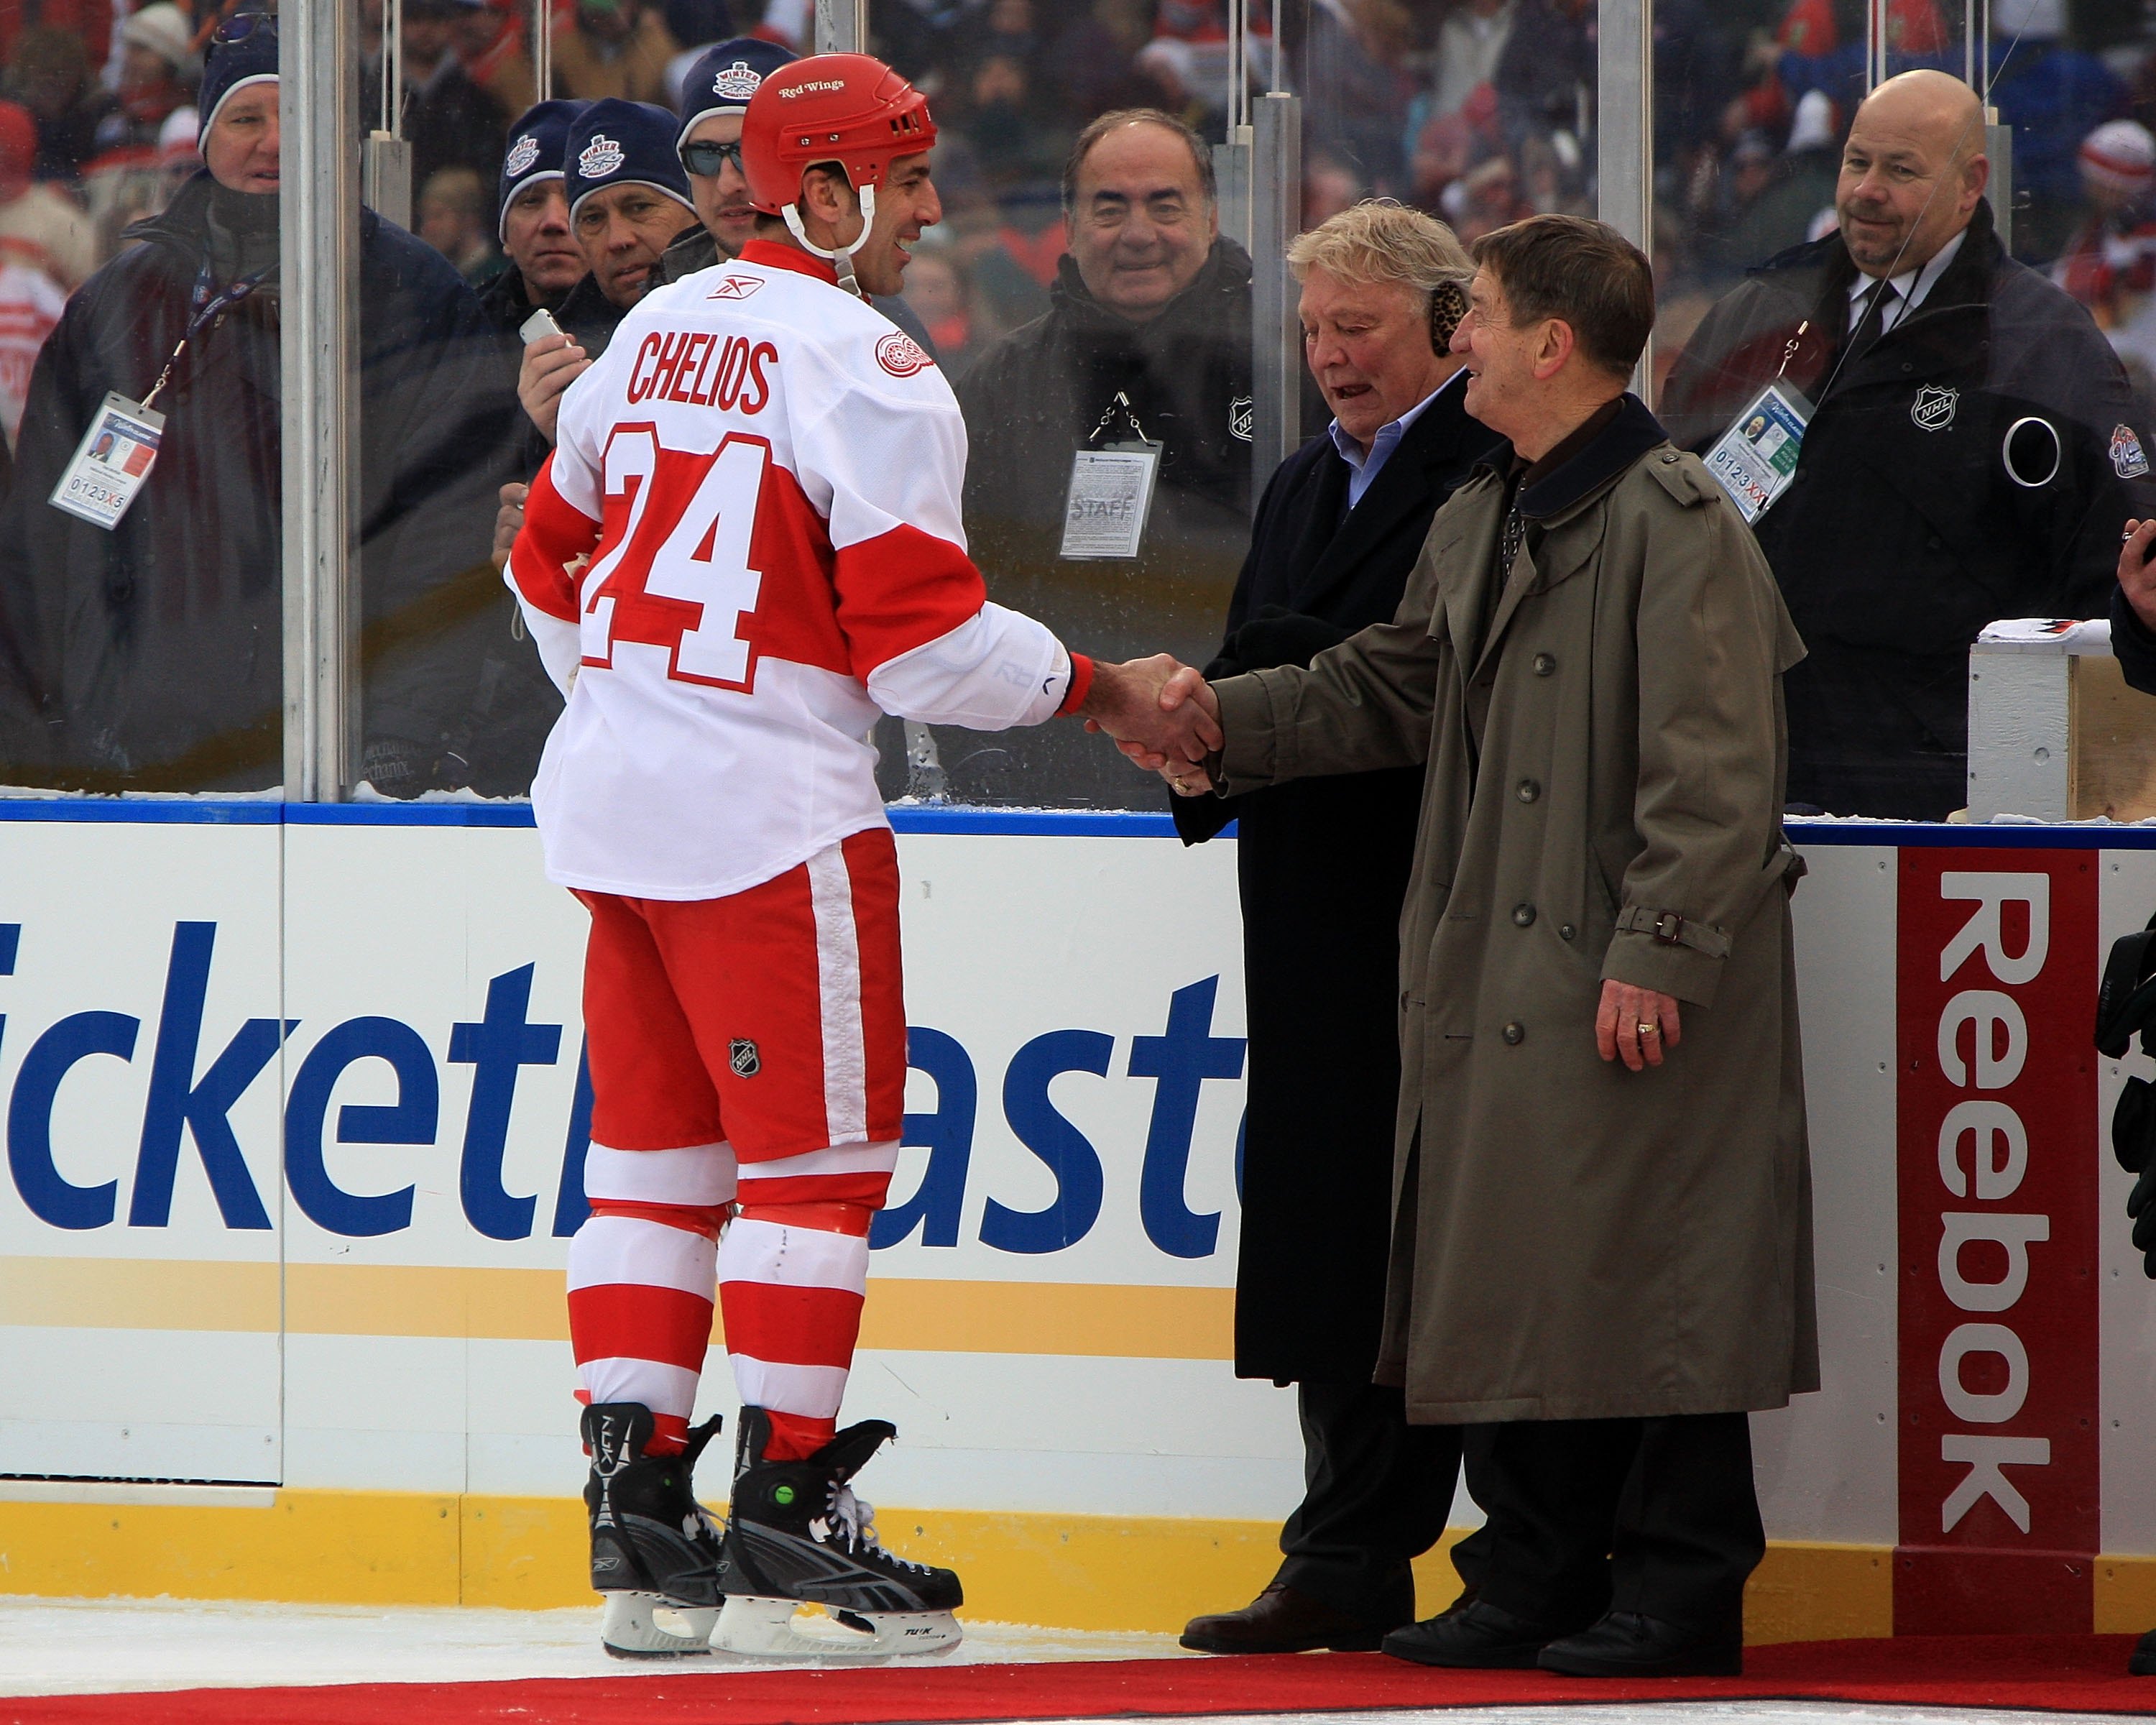 Ex-Detroit Red Wing Chris Chelios pounded beers on bench during game